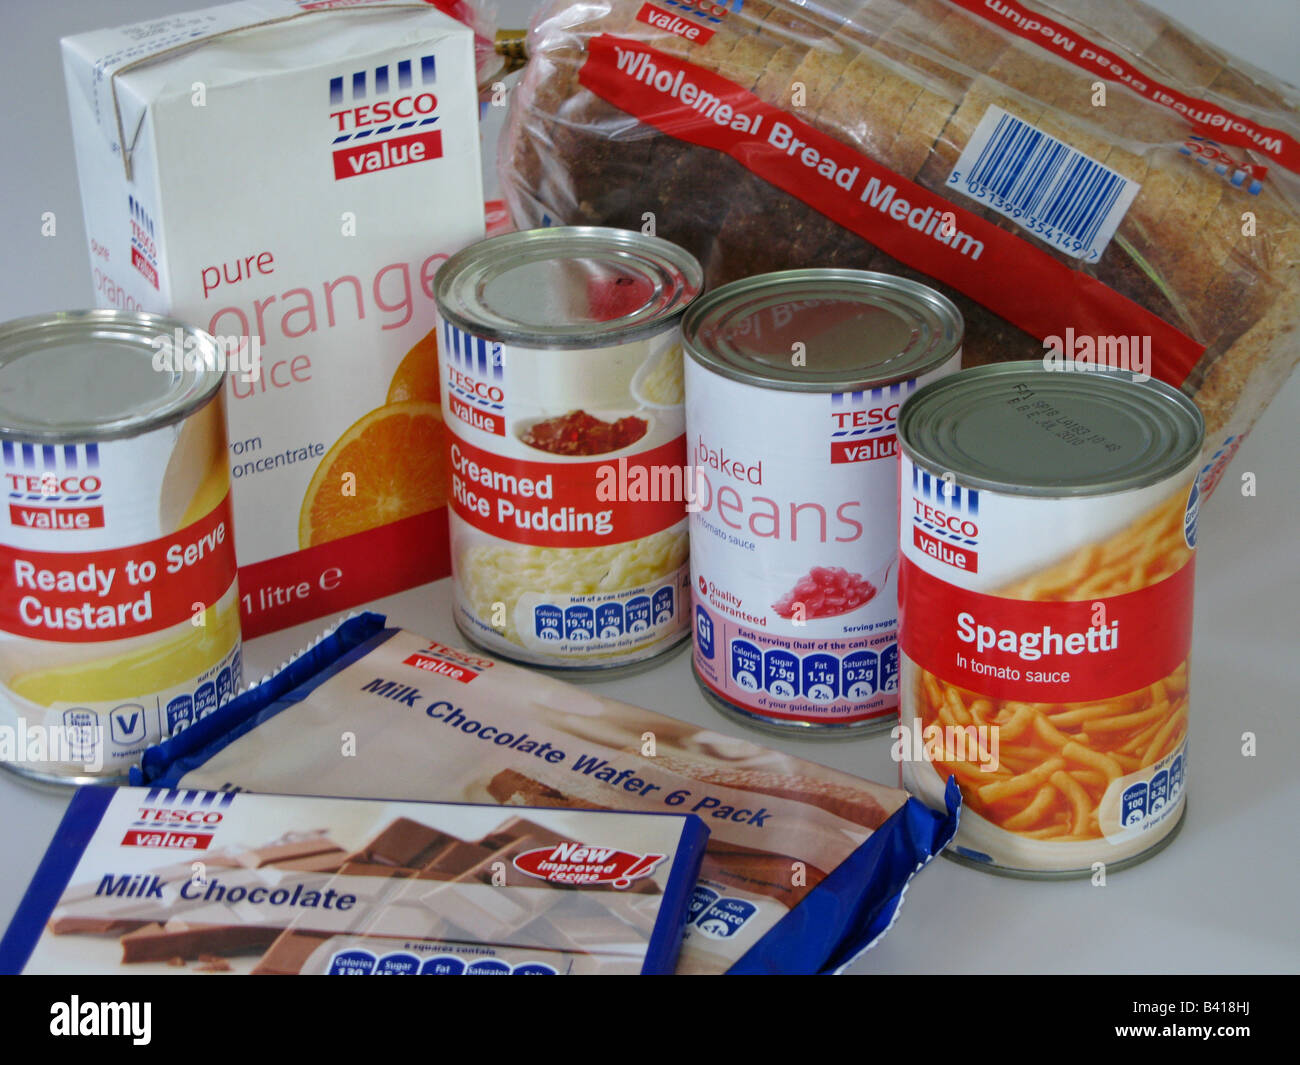 Tesco Value products a cheap reasonable range of foods Stock Photo - Alamy